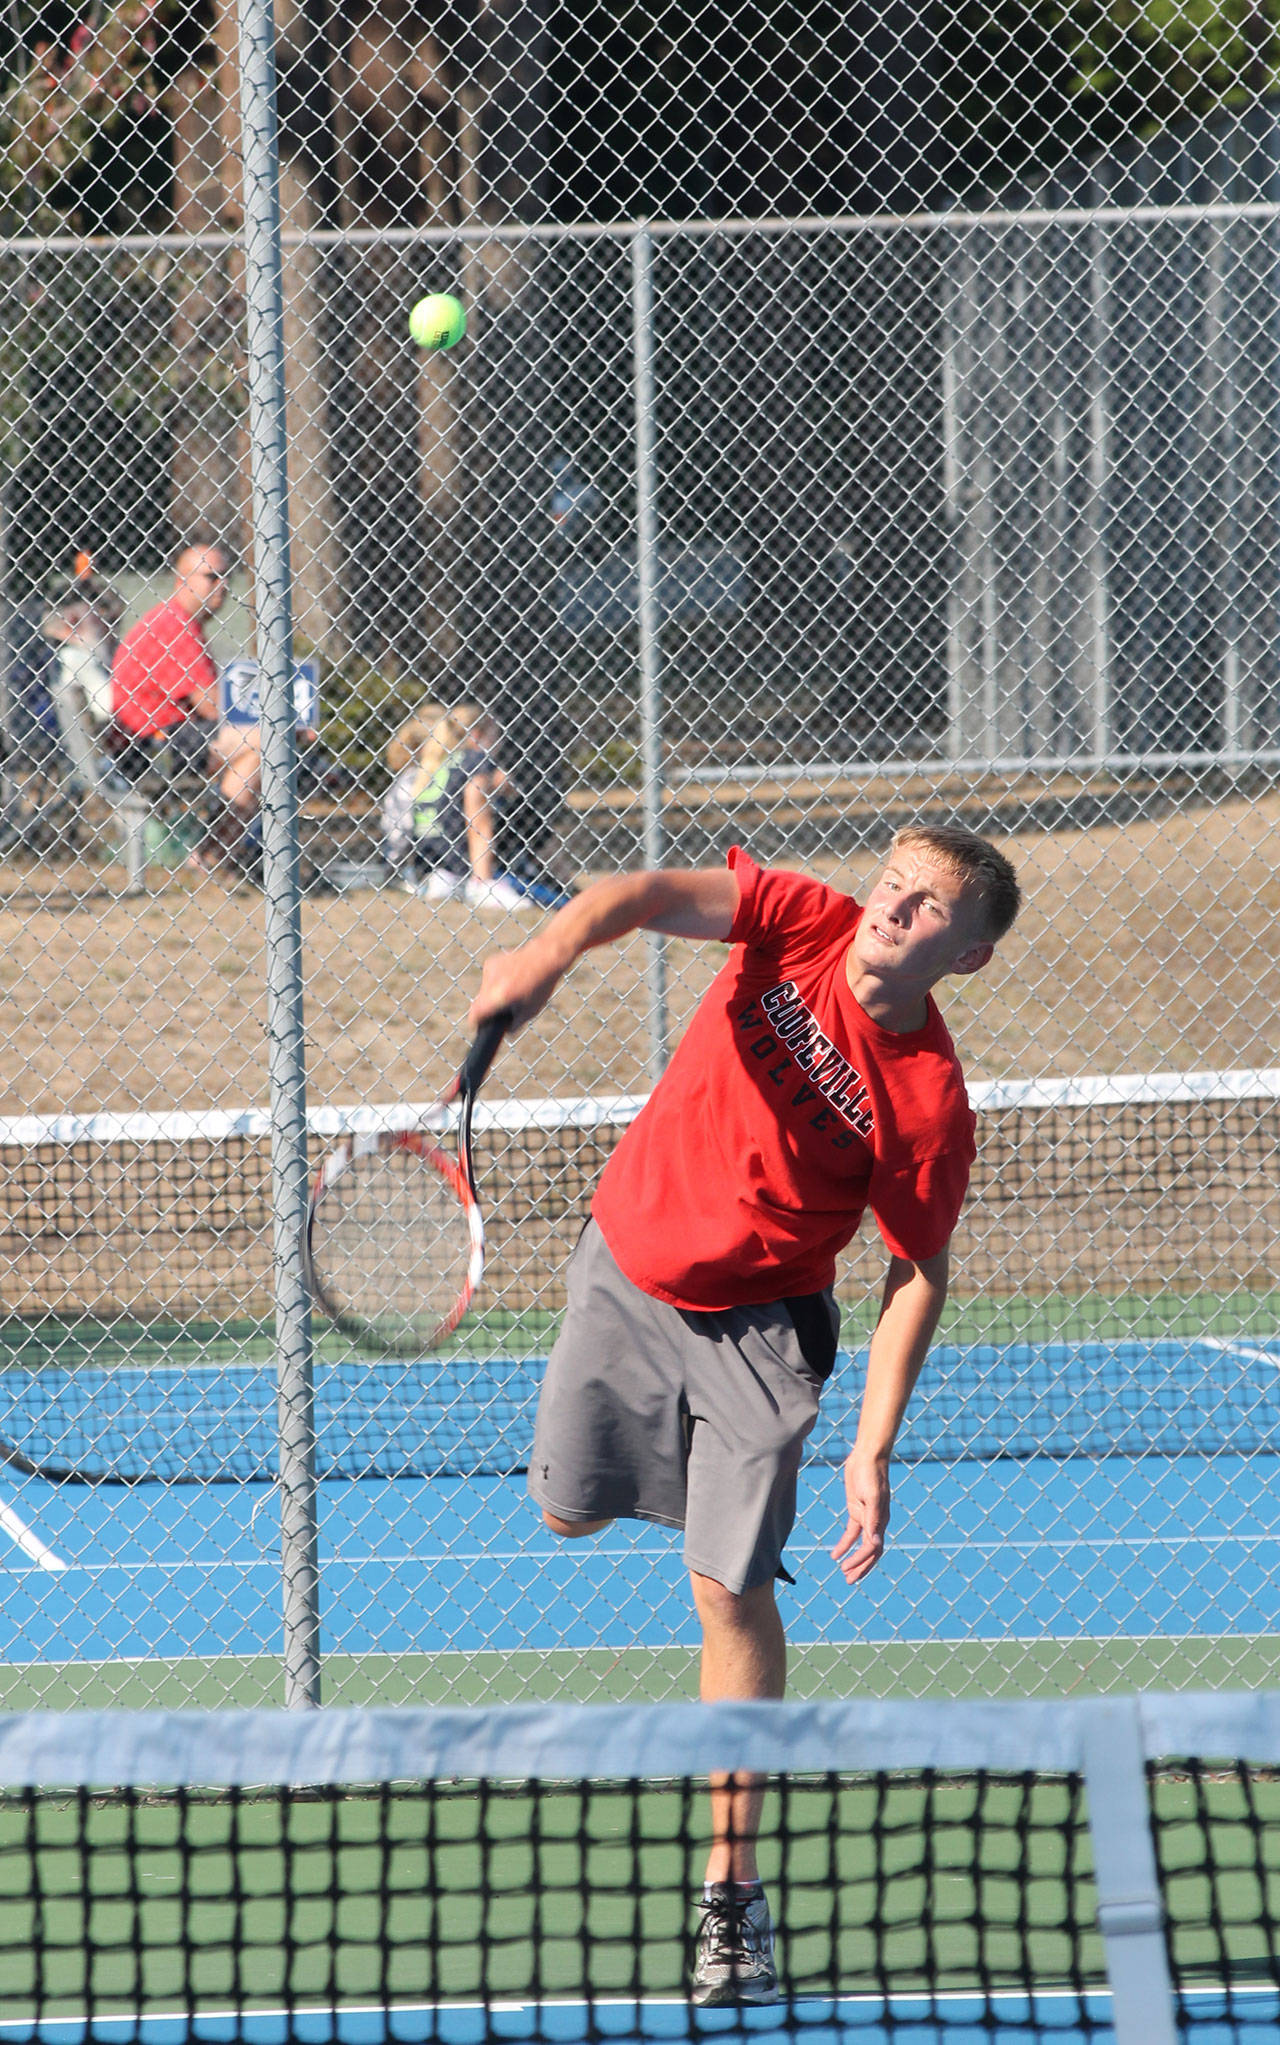 Drake Borden fires a serve in his win in second singles. (Photo by Jim Waller/Whidbey News-Times)